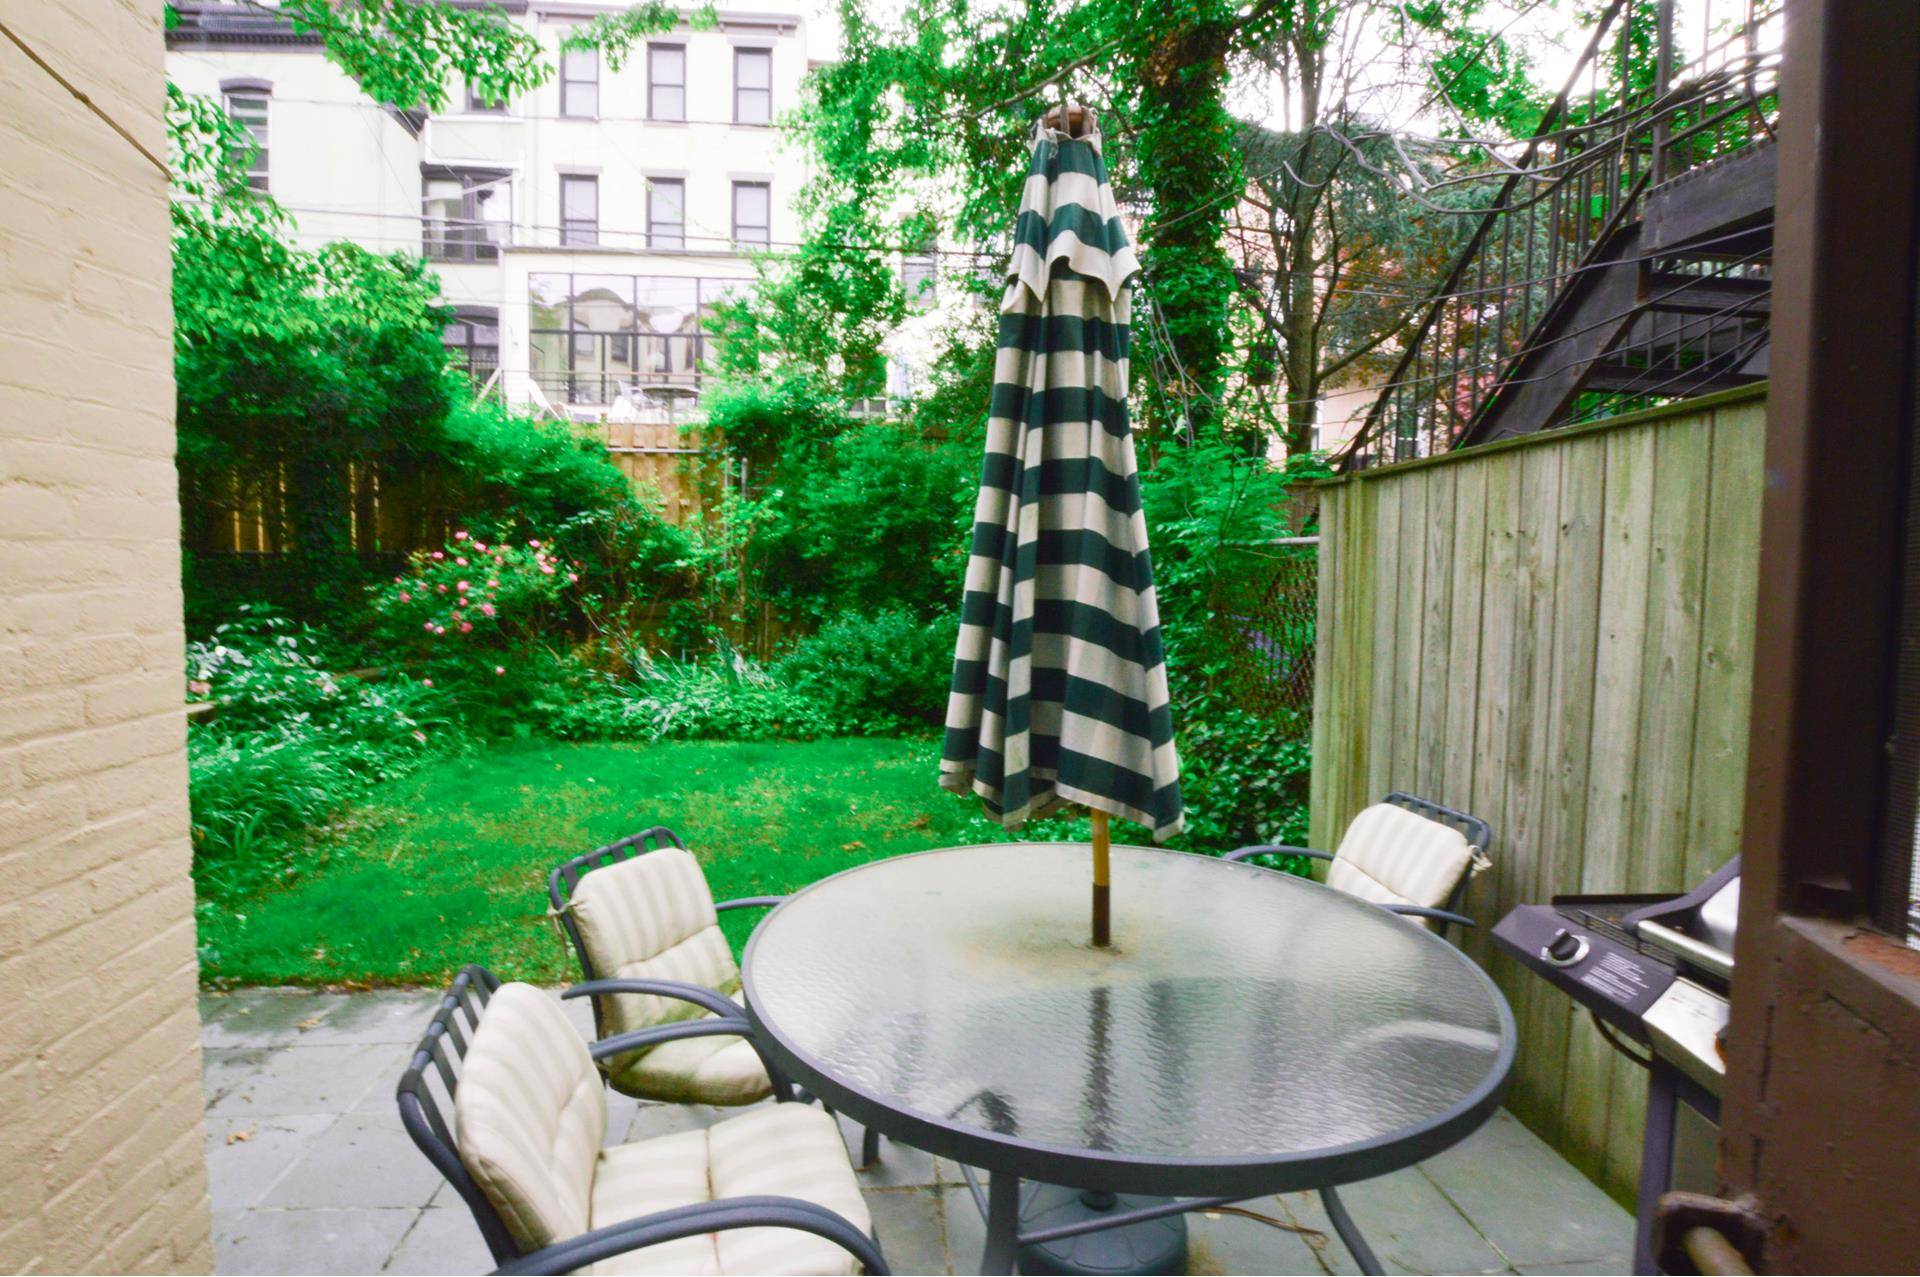 REDUCED FEE ! ! Sprawling 1, 000 sf Two Bedroom Garden unit available now !